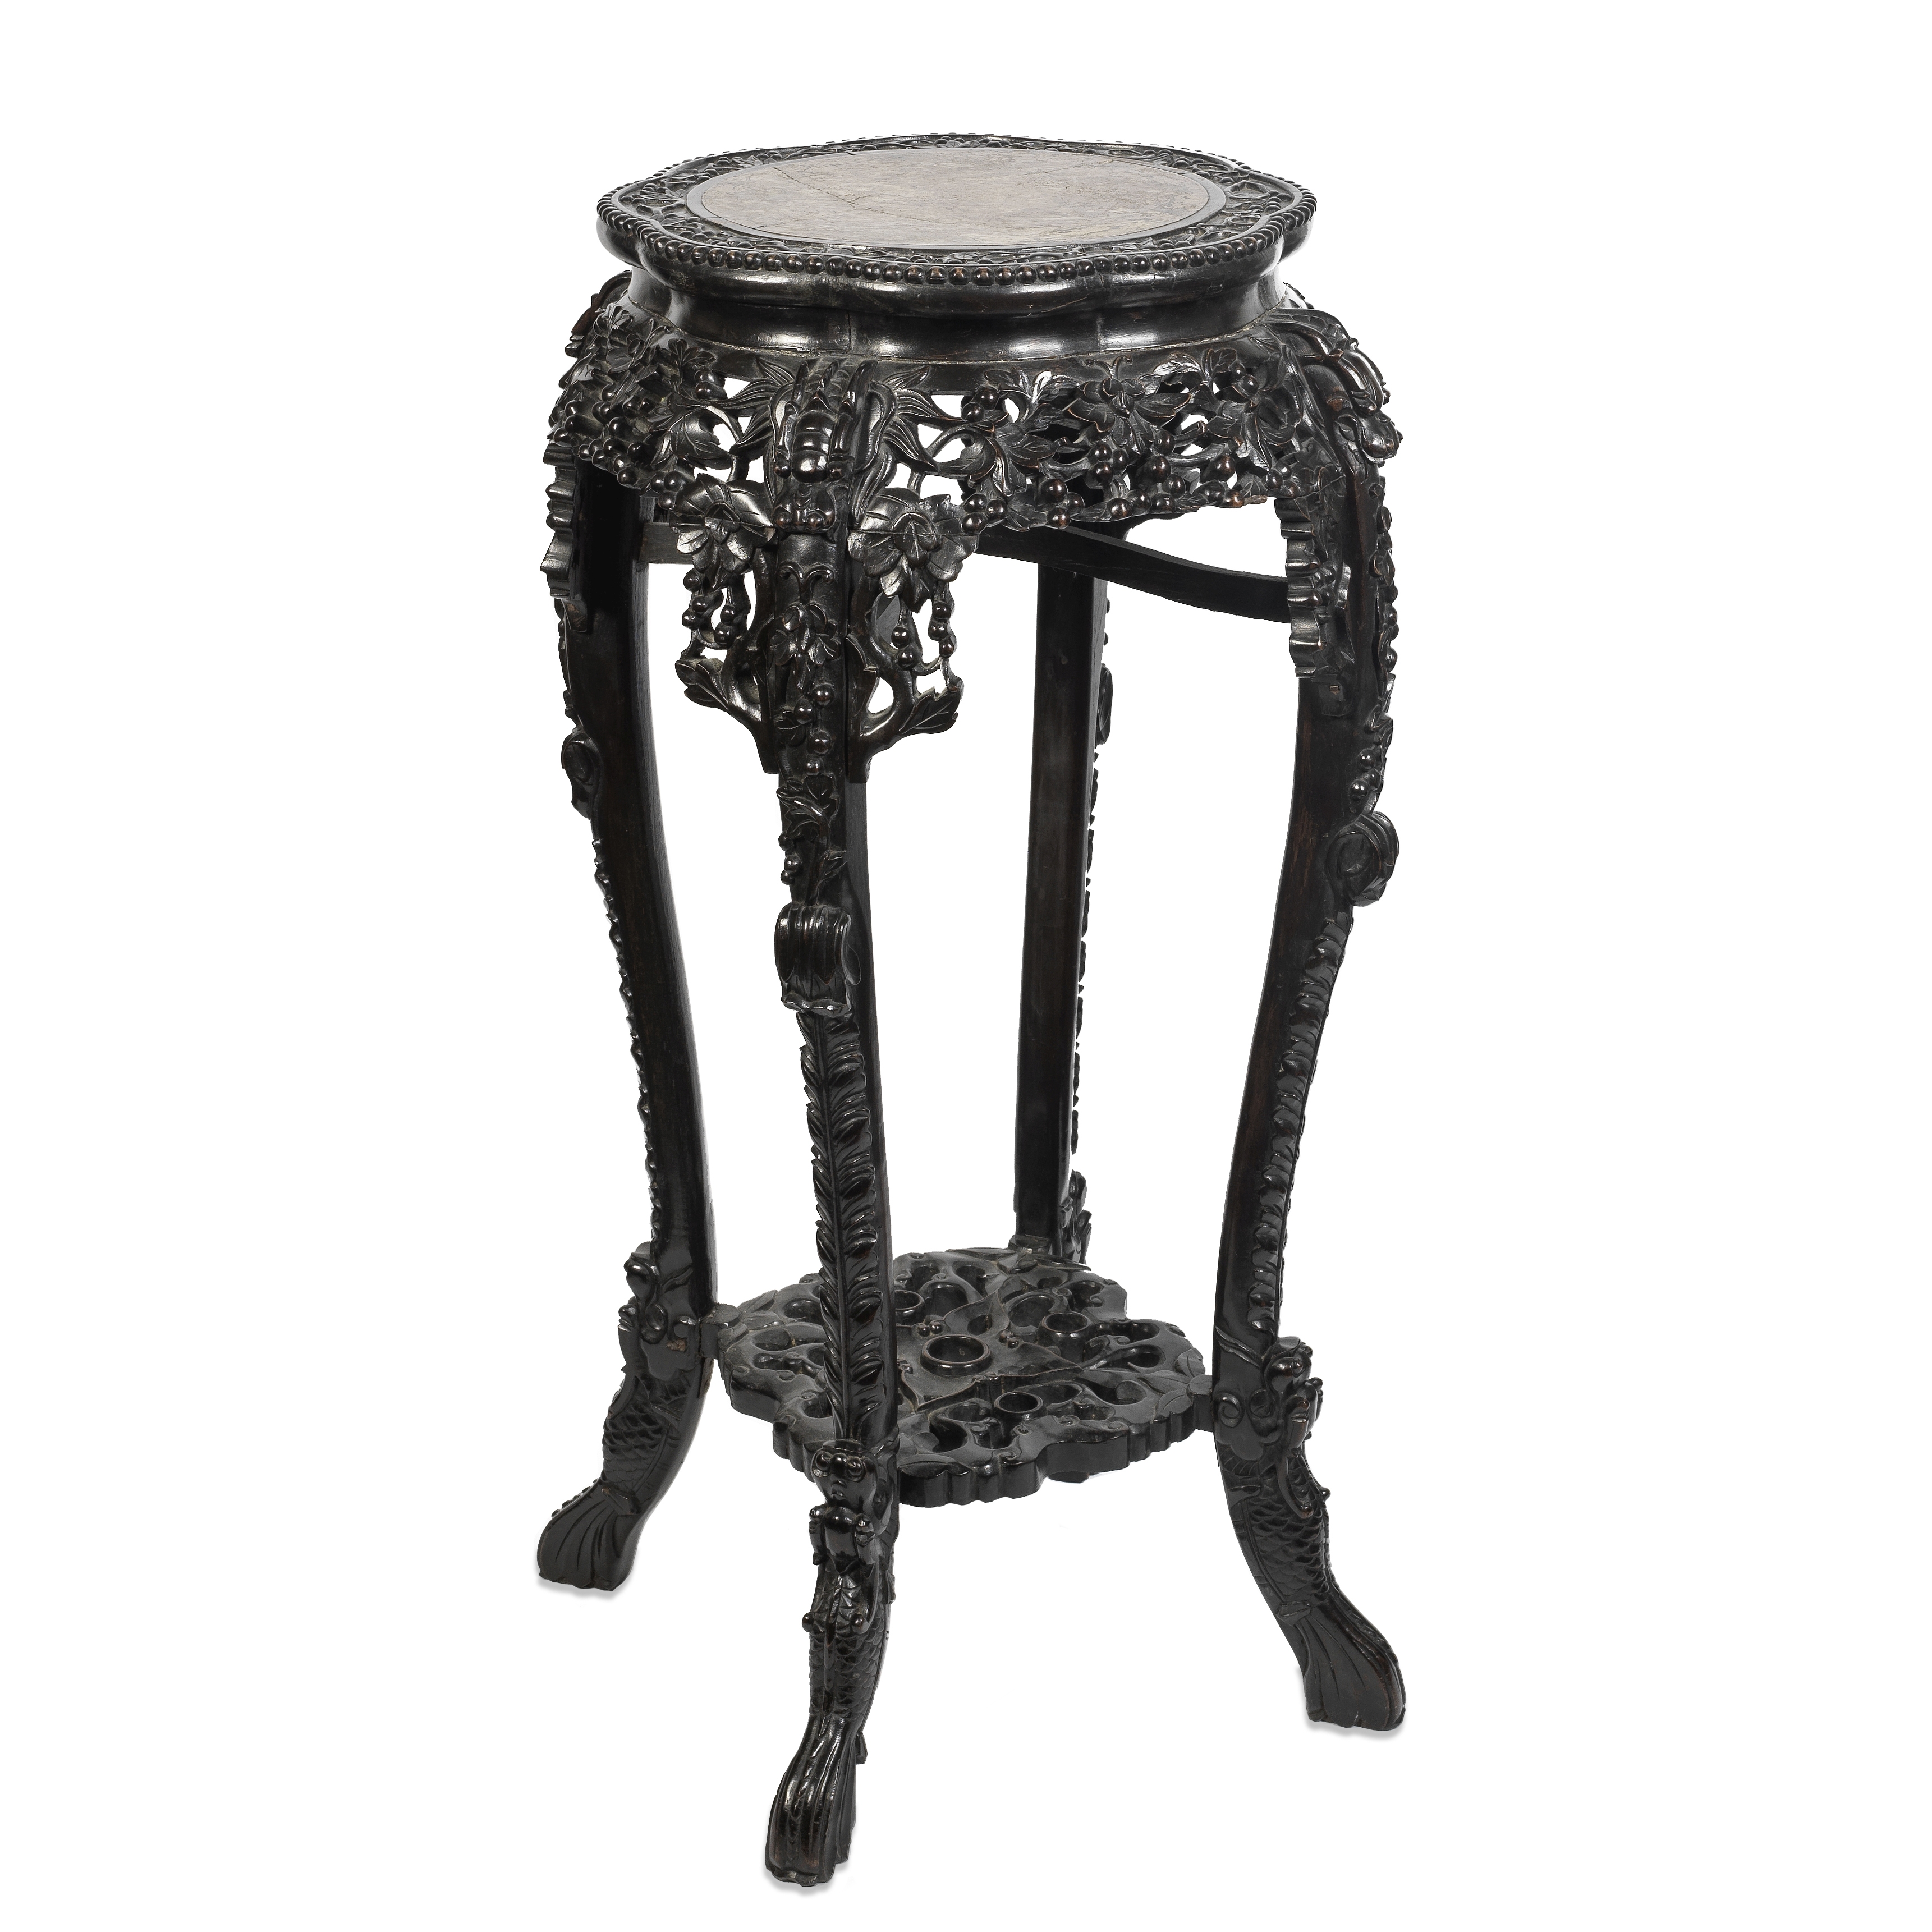 An early 20th century Chinese carved hardwood and rouge marble inset jardini&#232;re stand